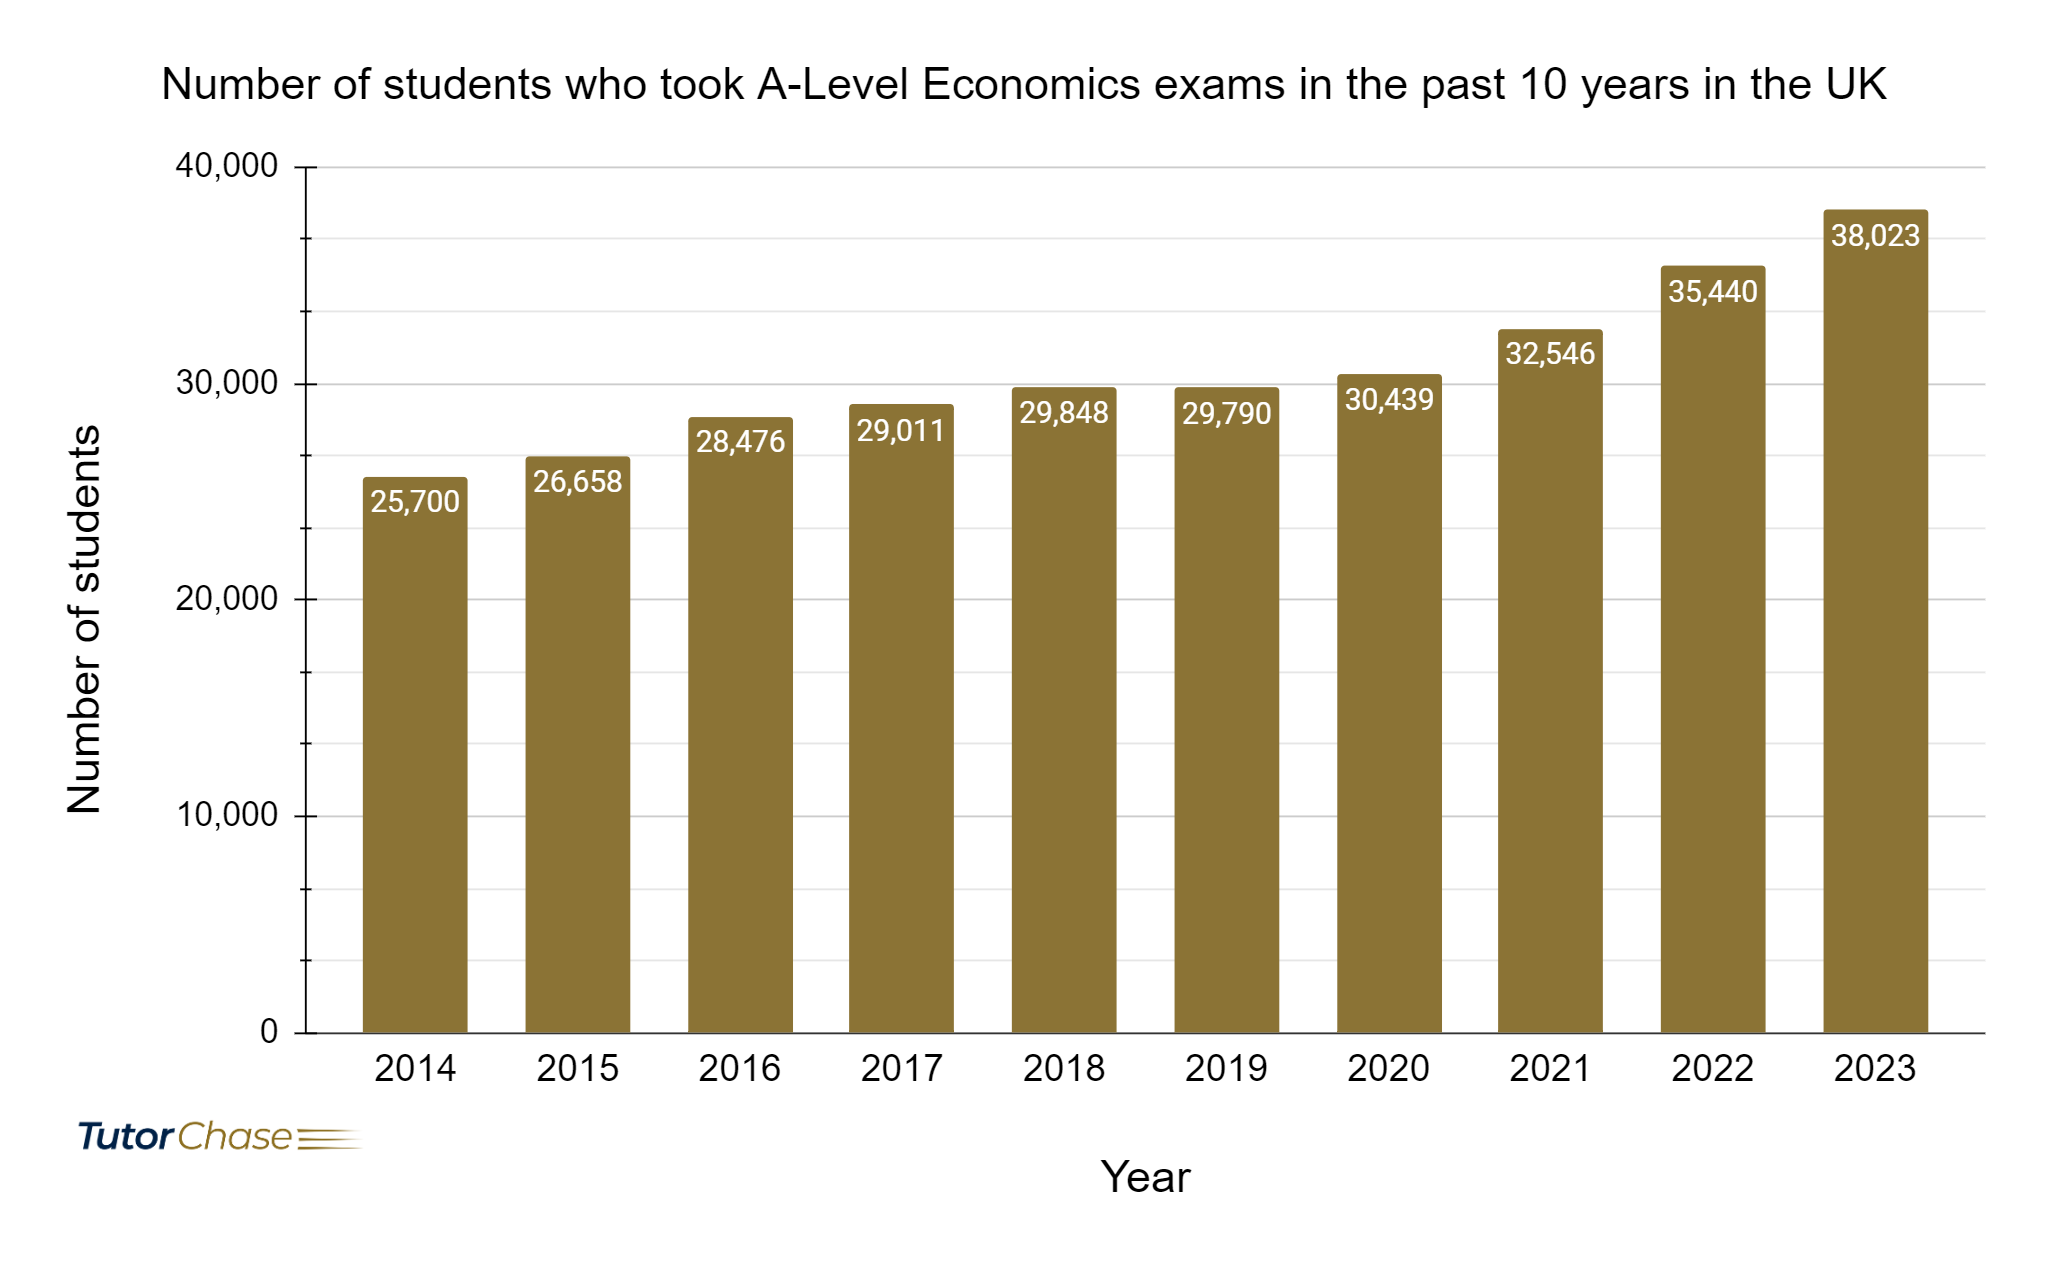 Number of students who took A-Level Economics exams in the past 10 years